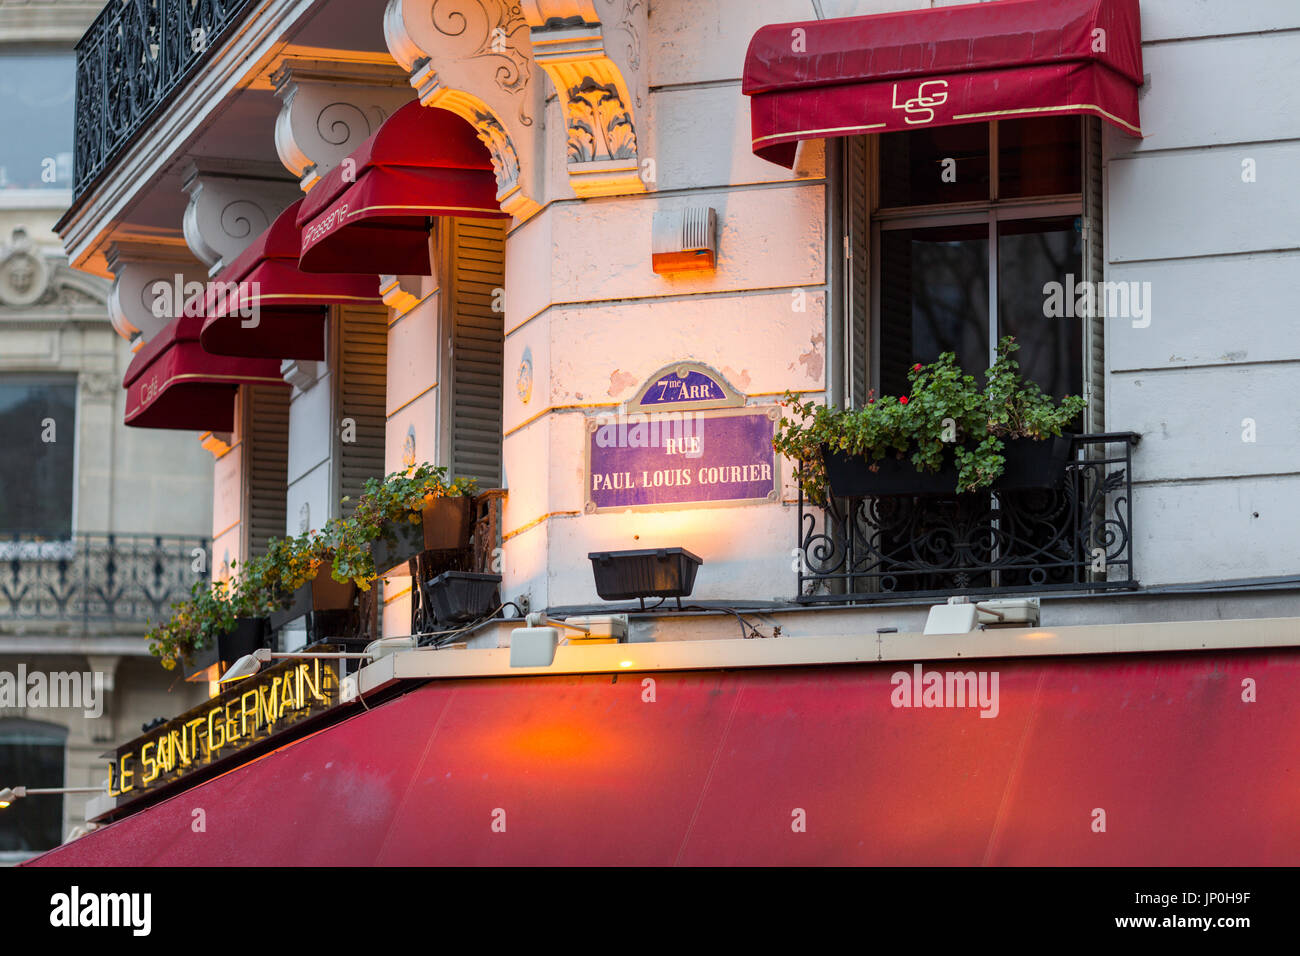 Paris, France - March 2, 2016: Le Saint Germain restaurant cafe with red awnings, early morning with lights still on. Stock Photo